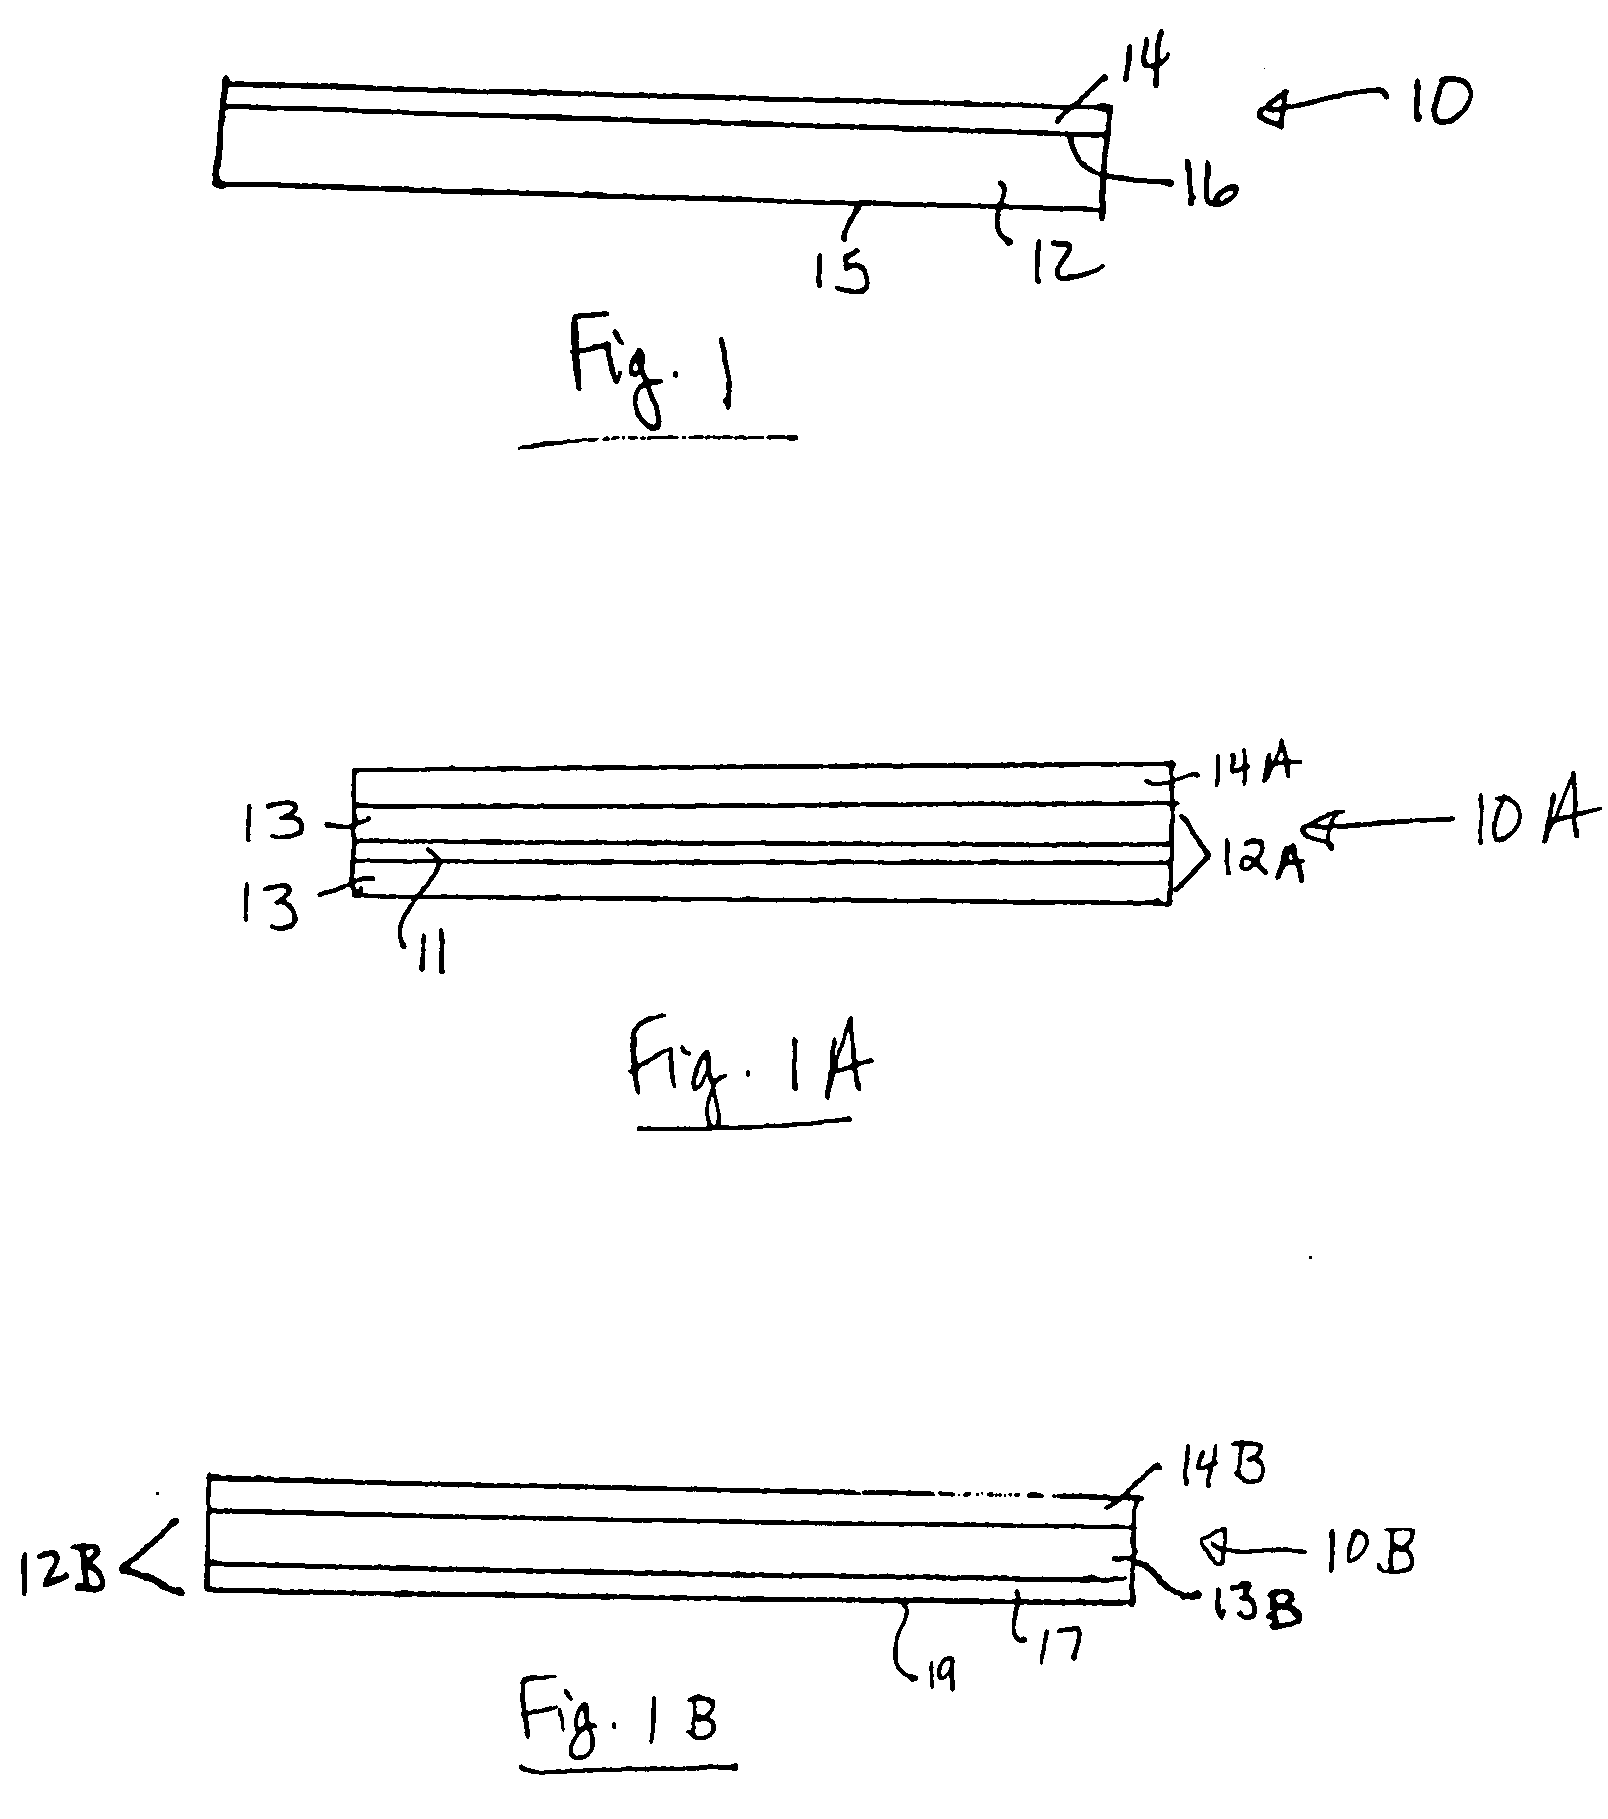 Articles and methods for applying color on surfaces